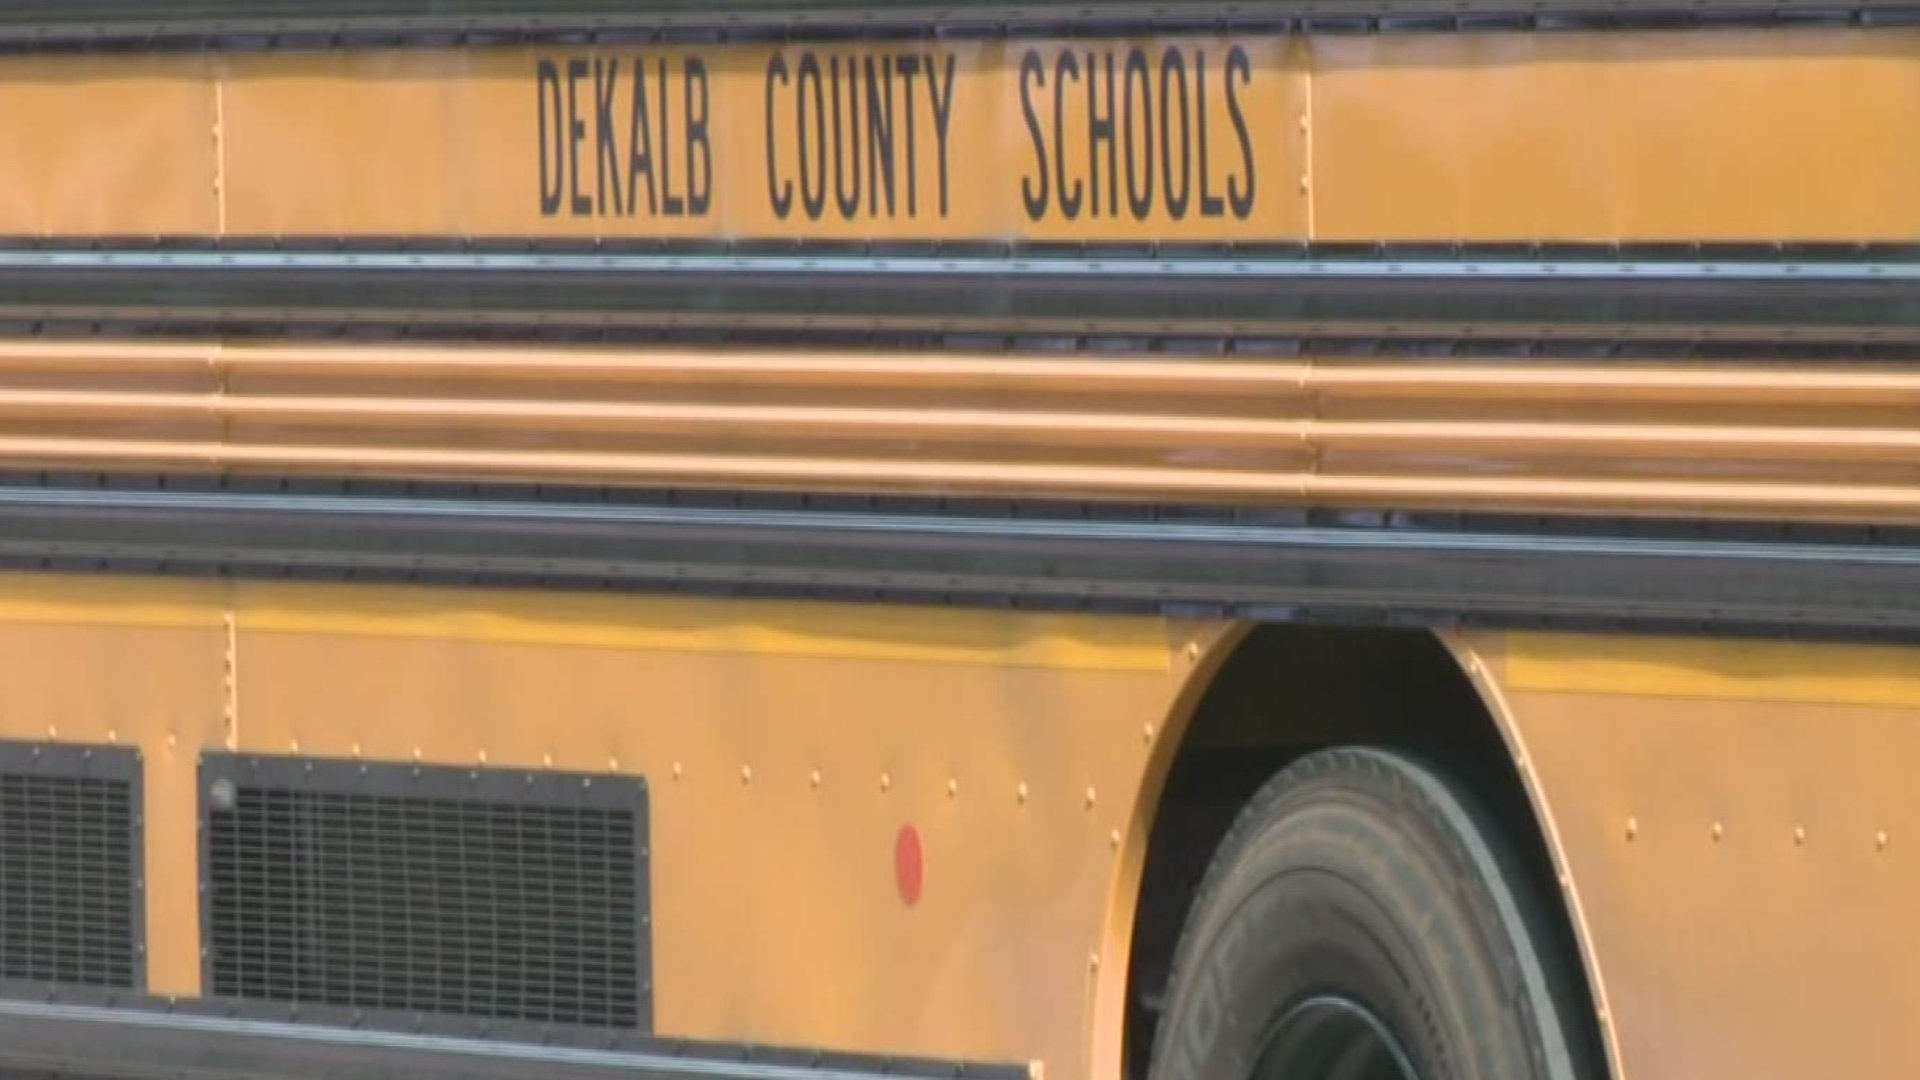 The district says two middle school students, one high school student, and an 18-year-old got on the bus and attacked the students.